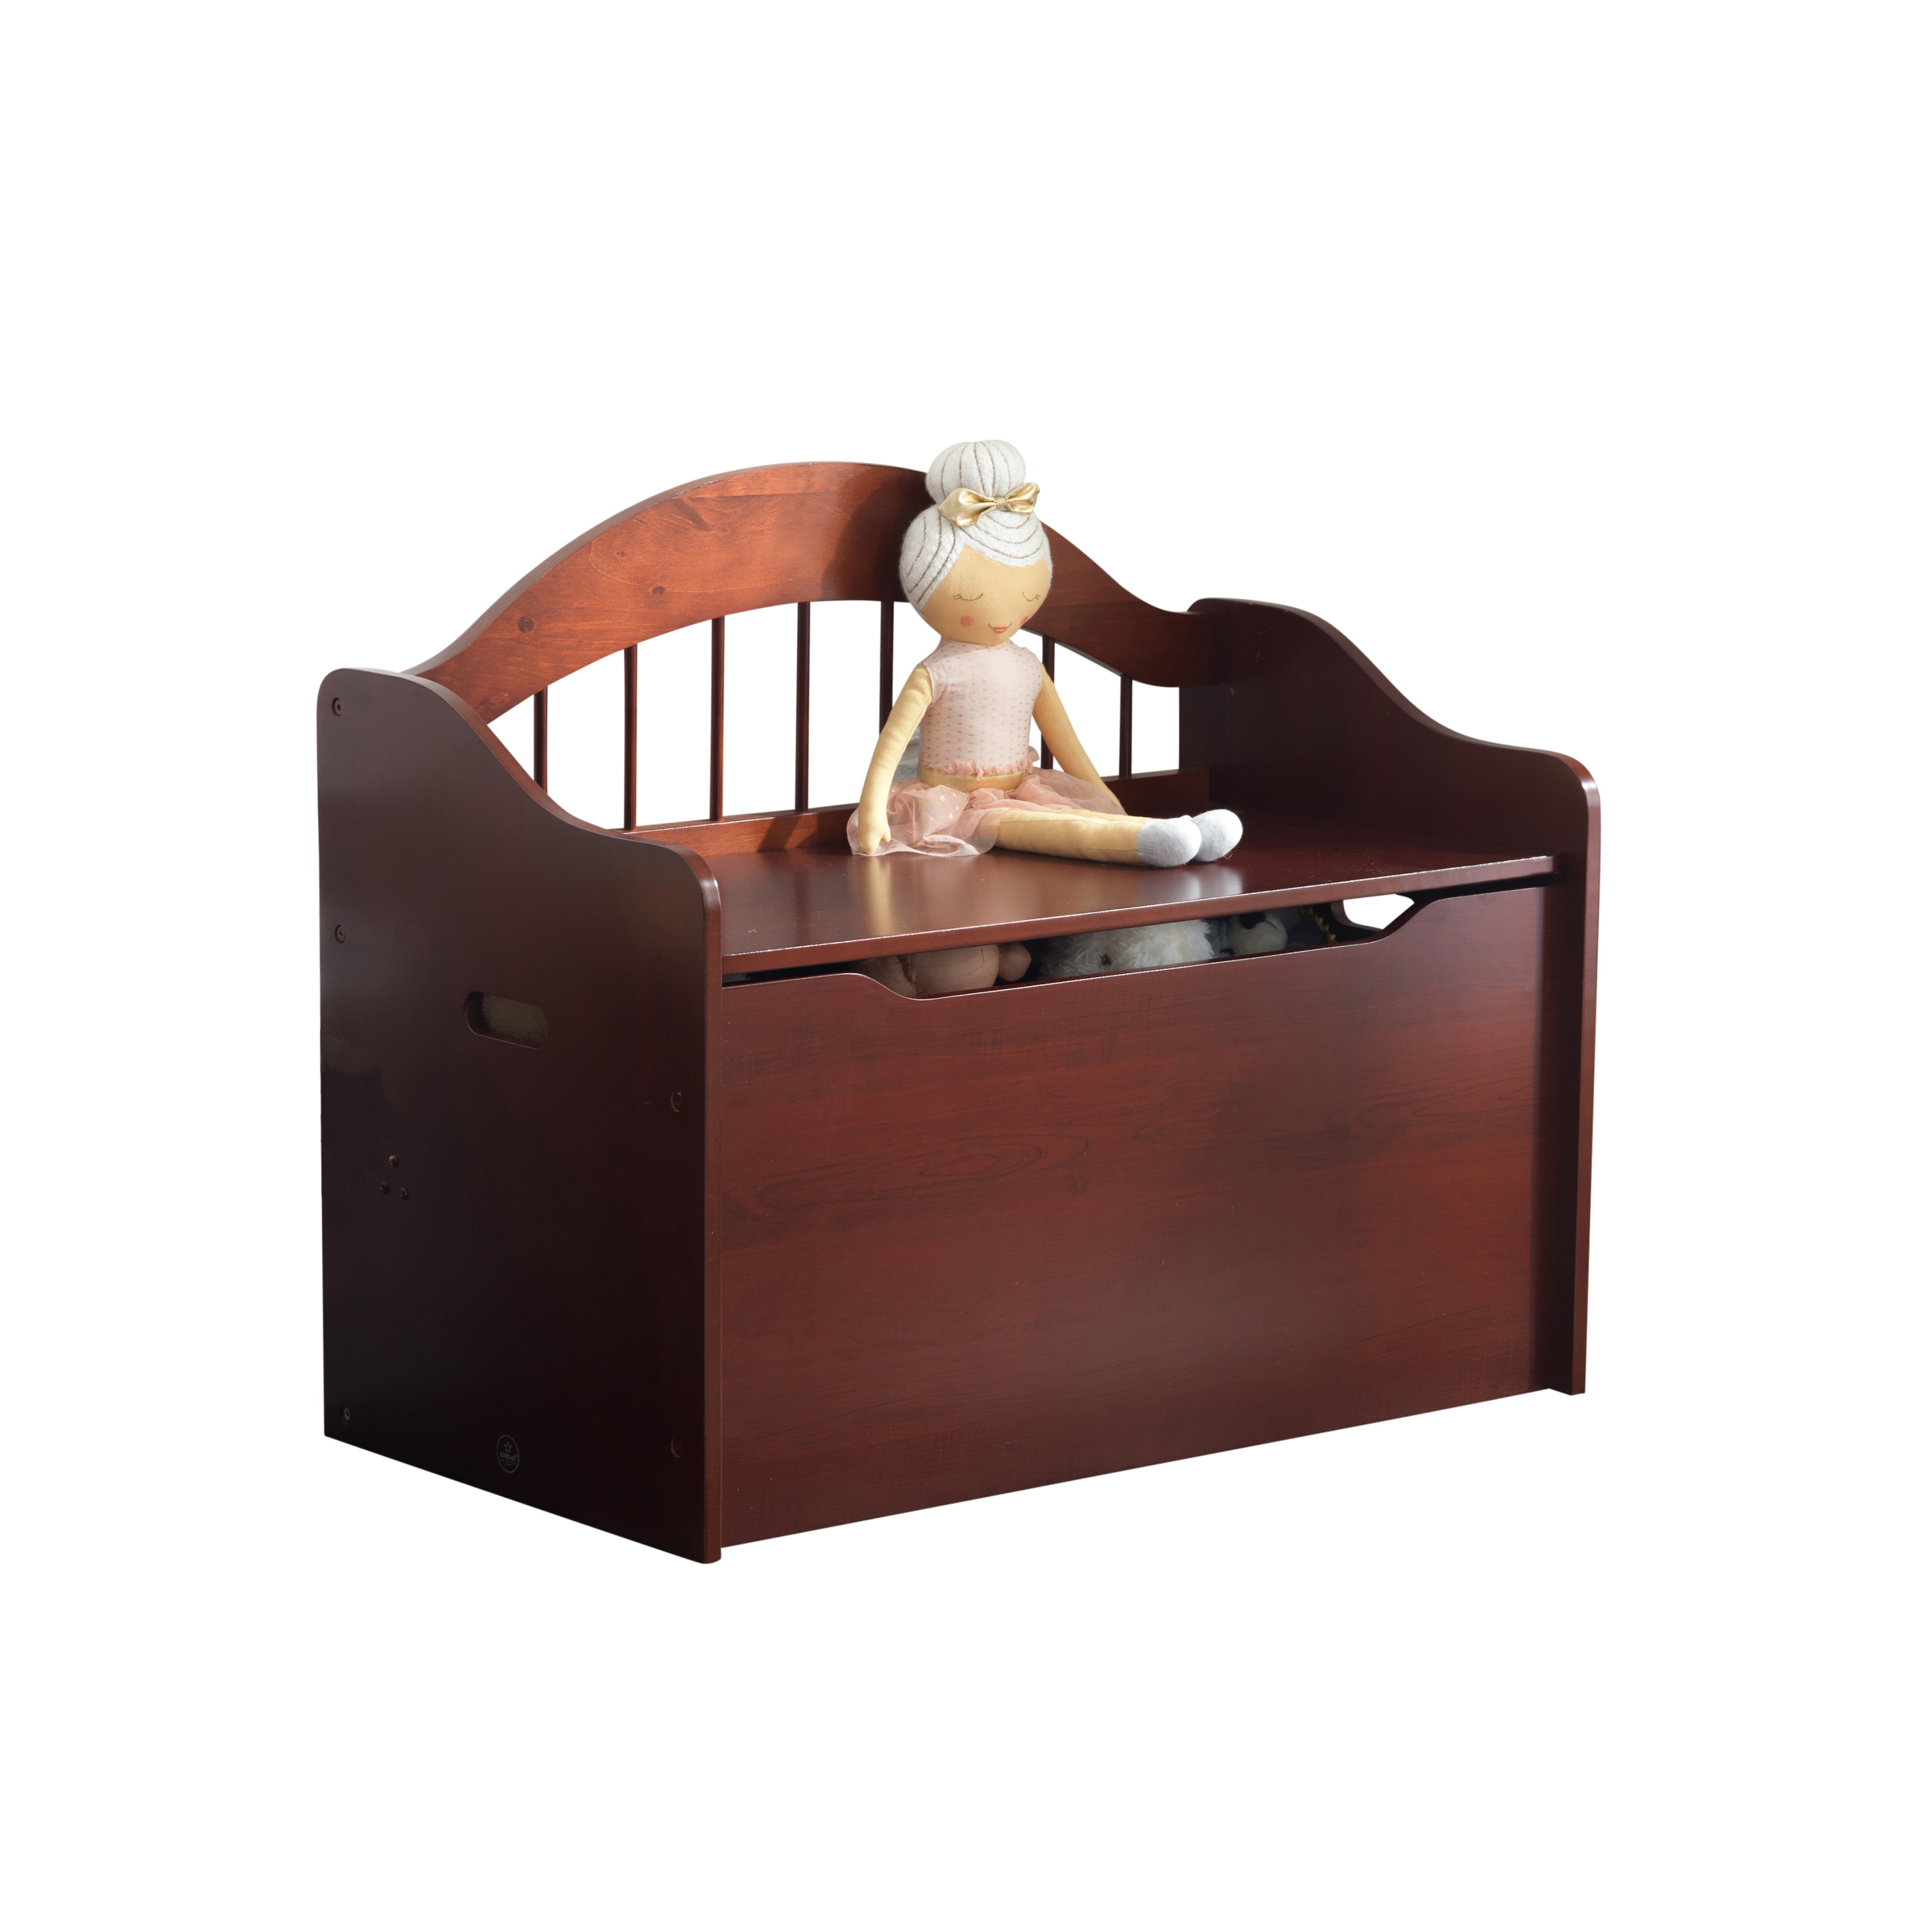 KidKraft Limited Edition Wooden Toy Box and Bench with Handles, Cherry - image 4 of 7